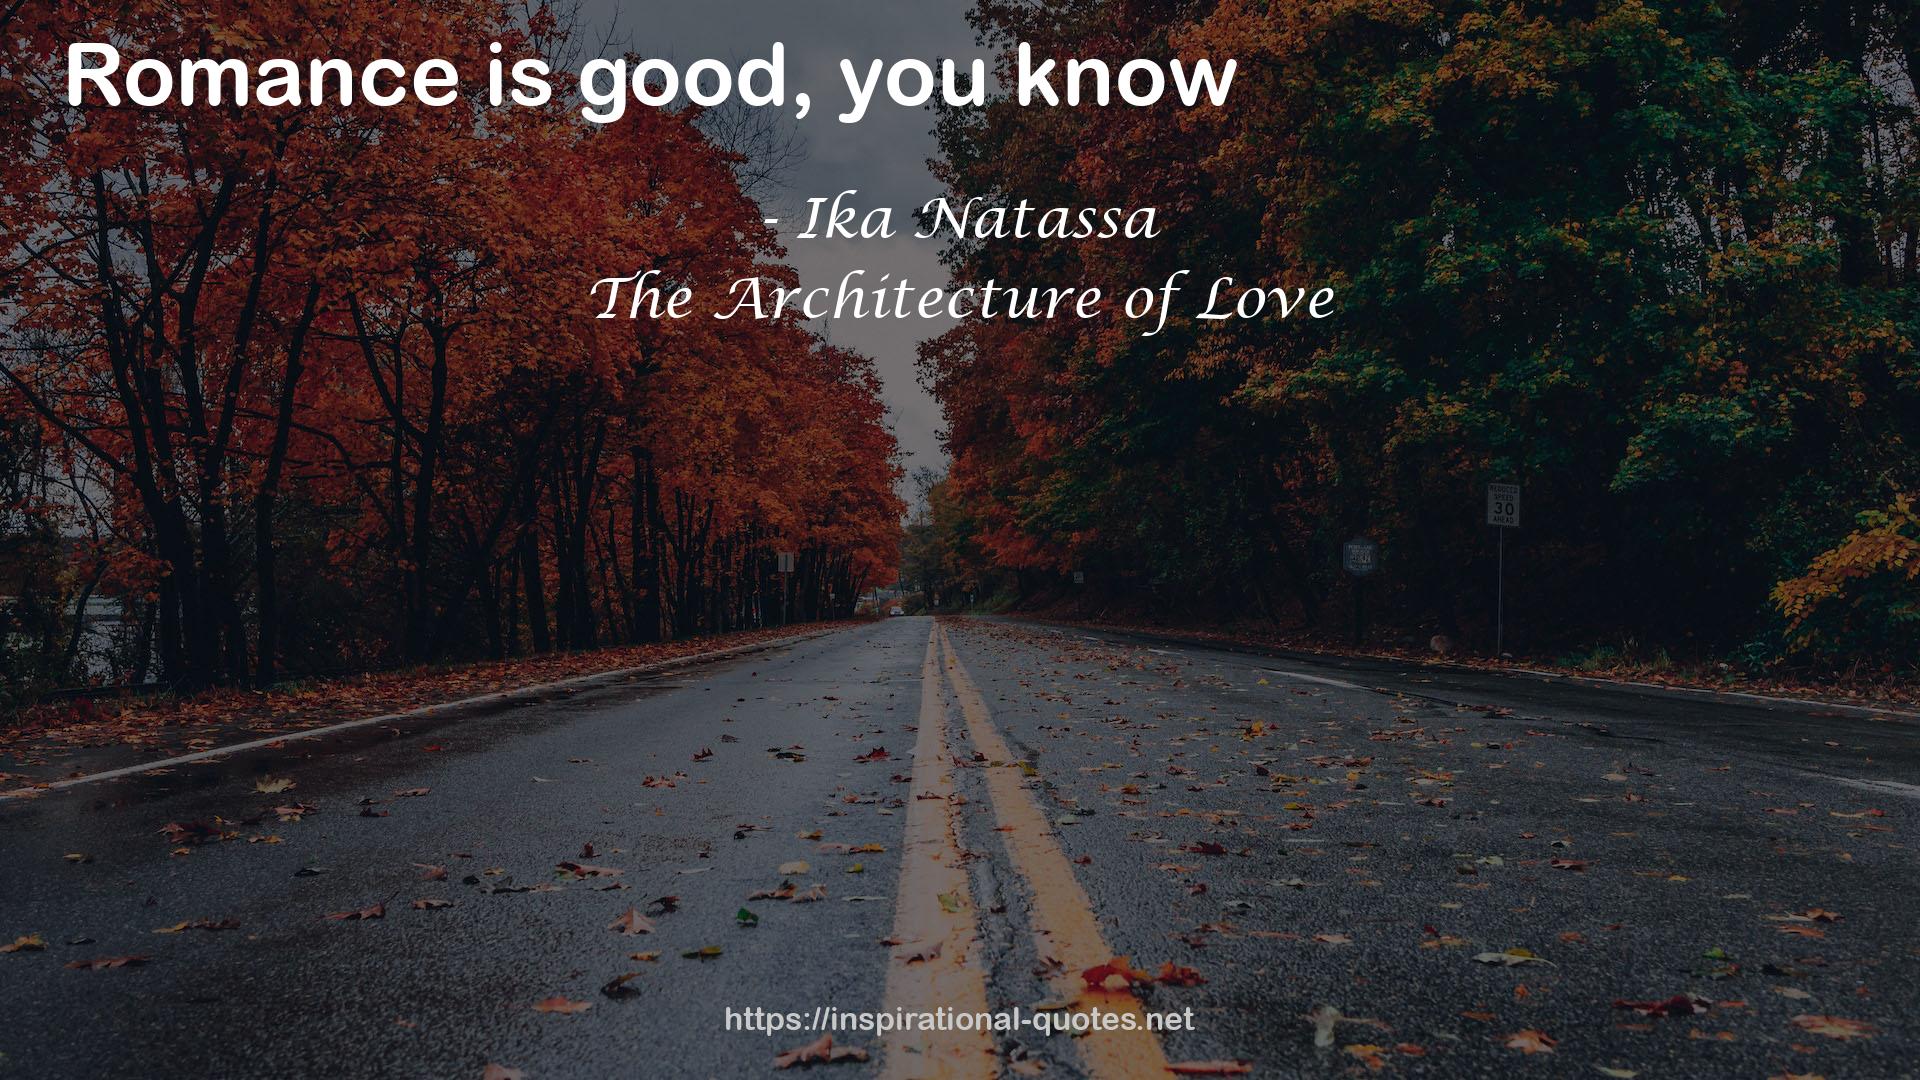 The Architecture of Love QUOTES